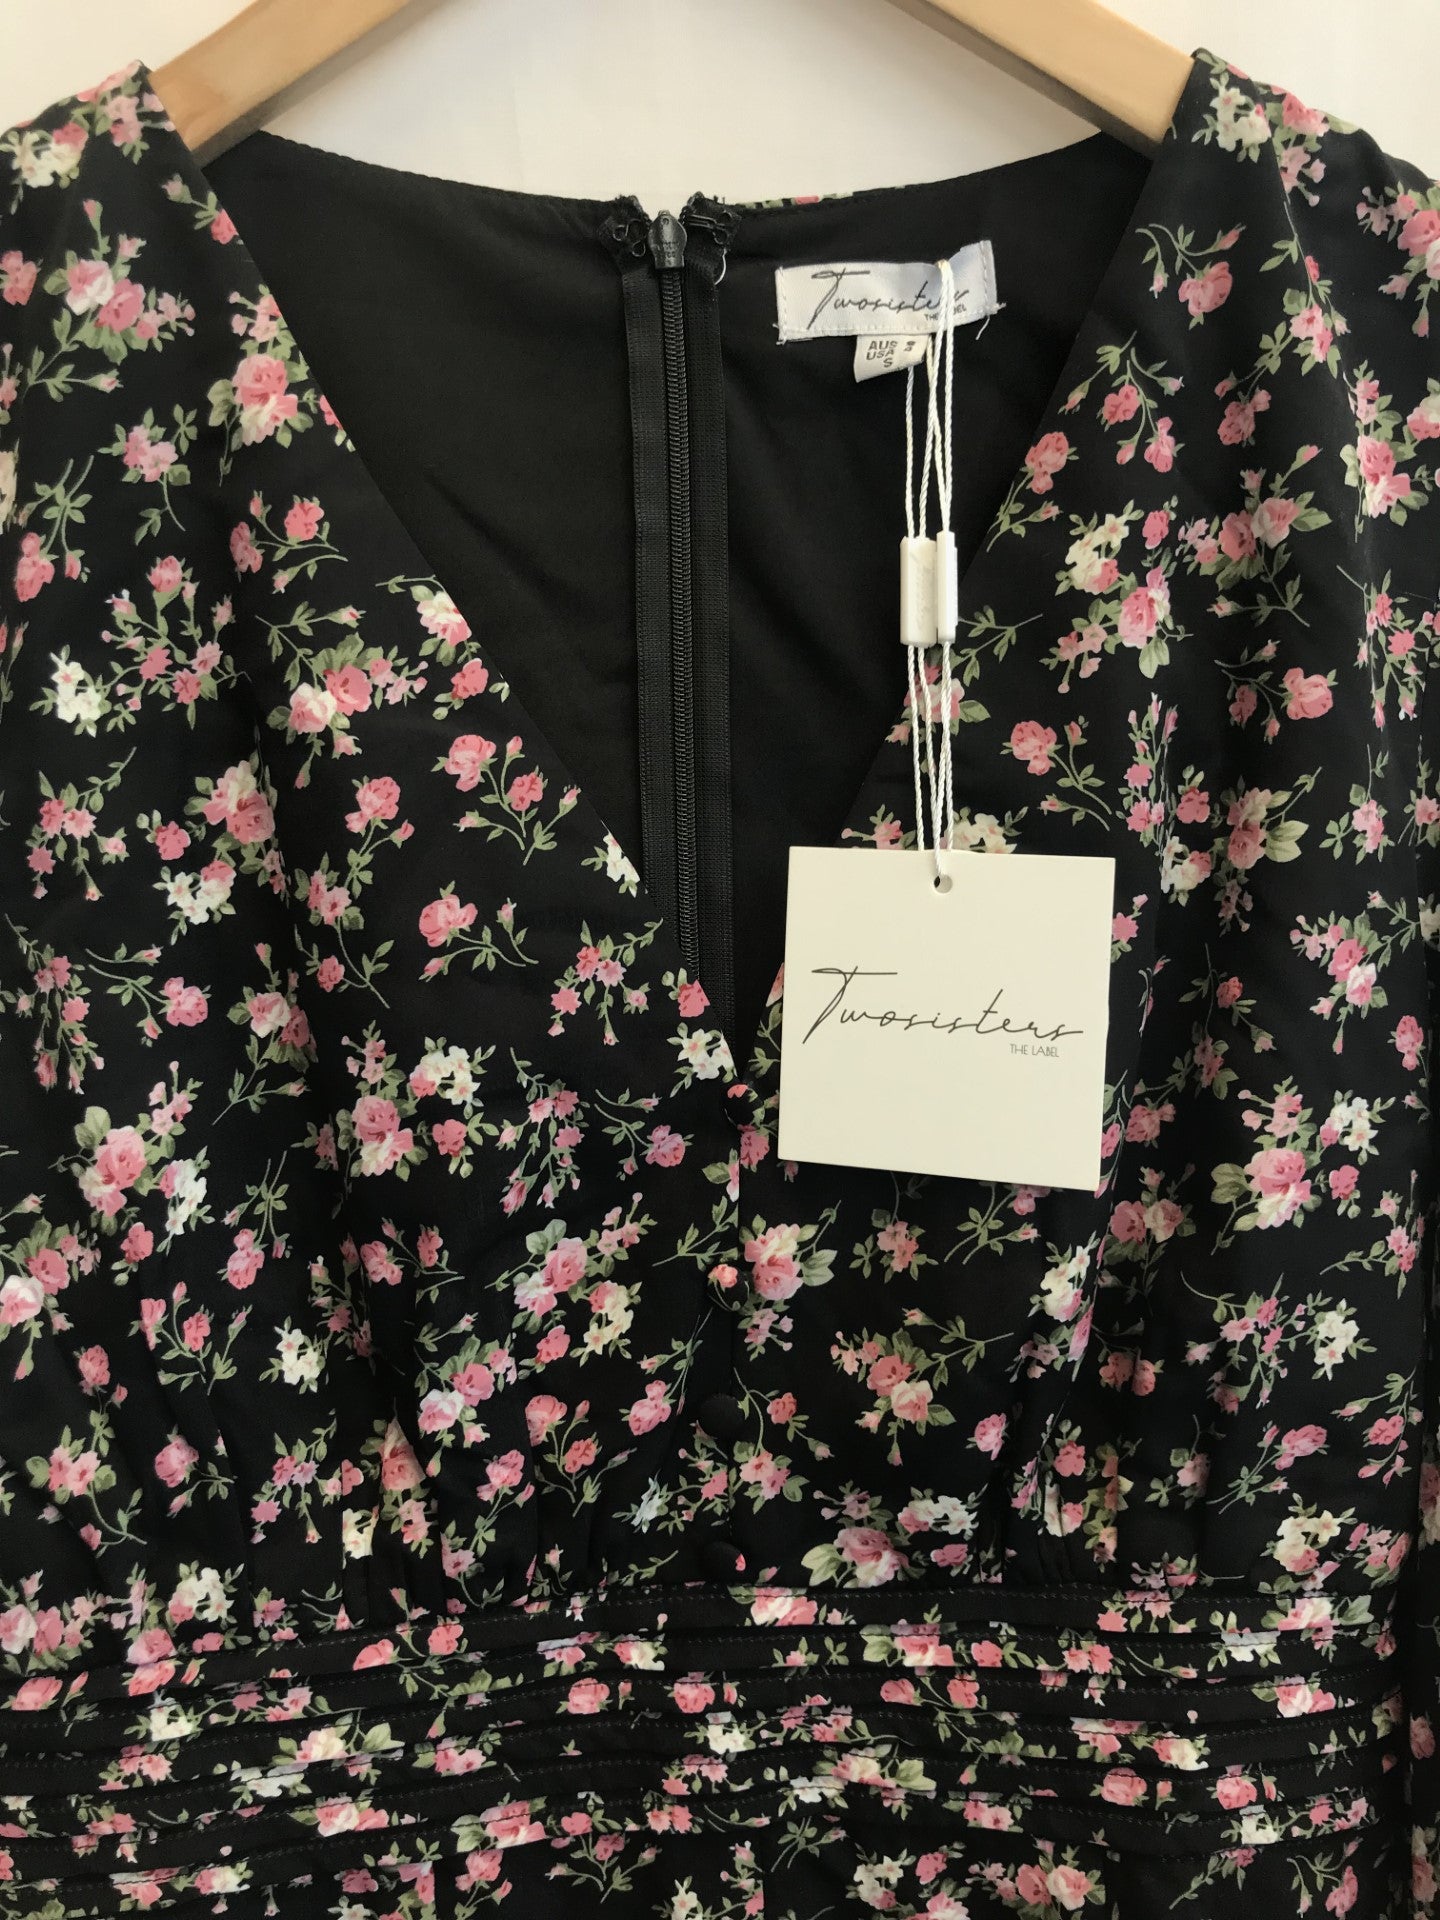 TwoSisters Black and Pink Long Sleeve Floral Dress, Size UK 8, BNWT